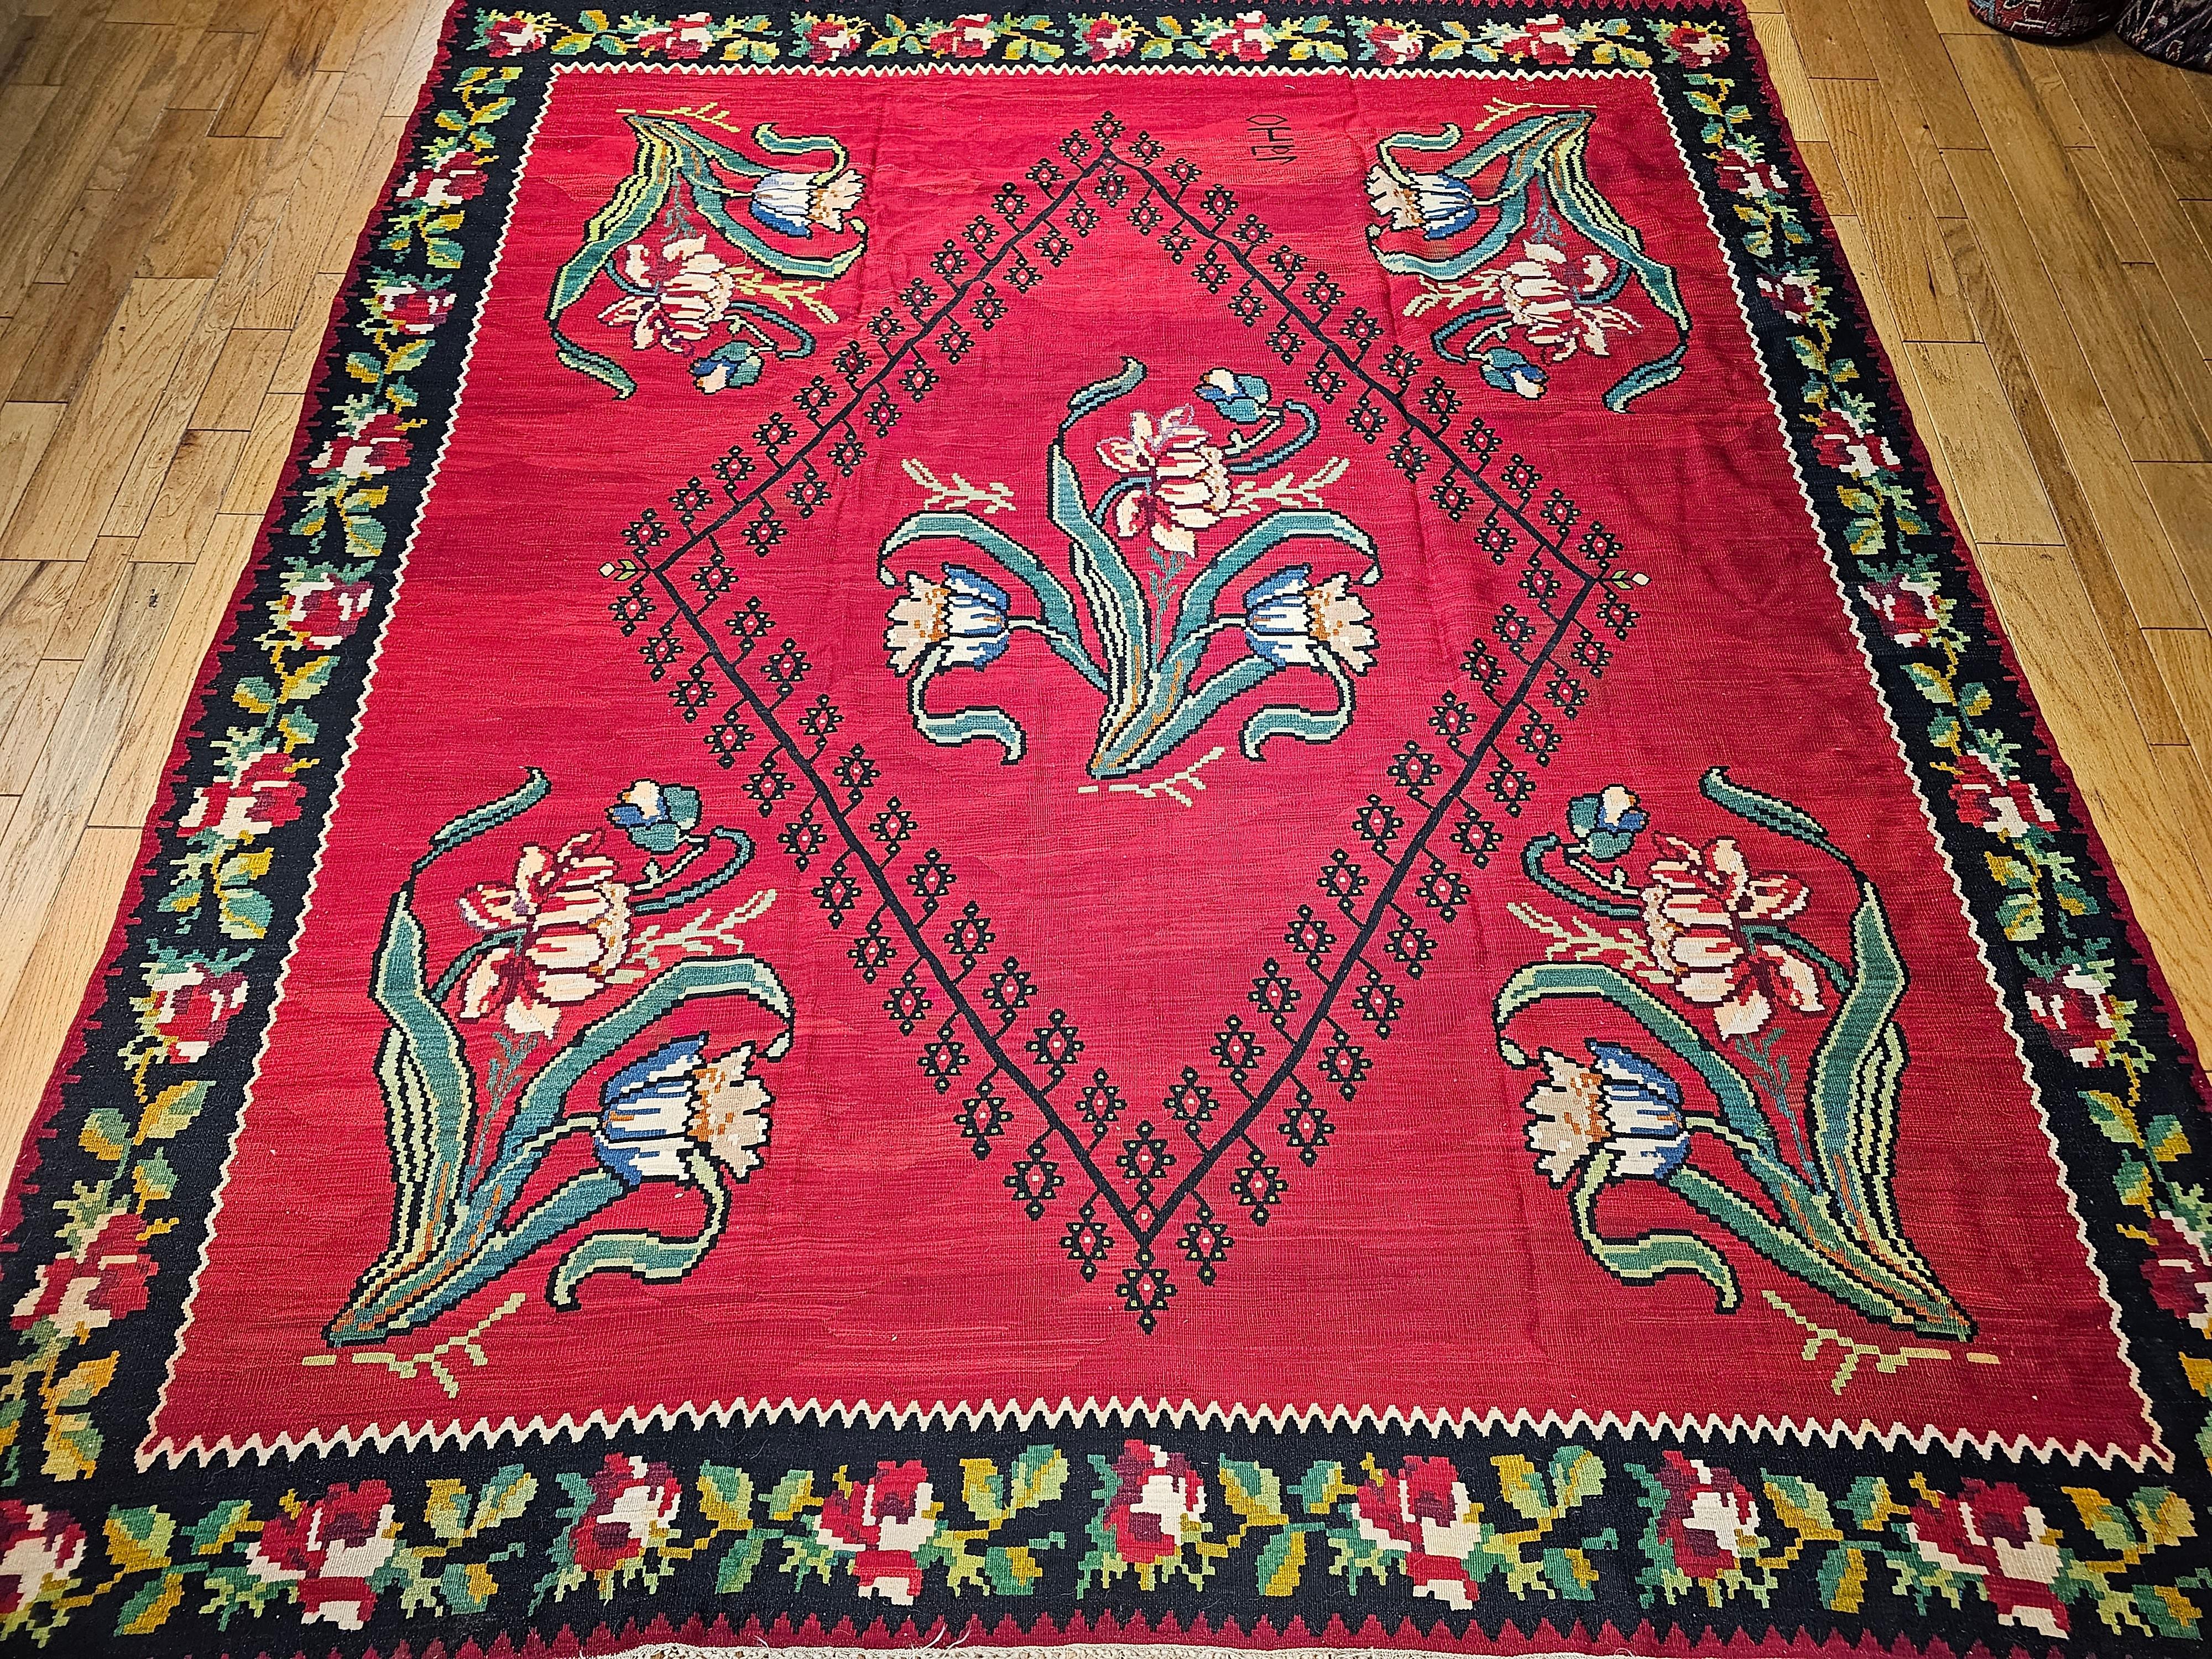  Room Size Bessarabian Turkish kilim in beautiful bright colors and design from the first half of the 1900s. The Kilim has a brilliant red color in the field and has the design of 5 bouquets of flowers one in the center and the other four in the